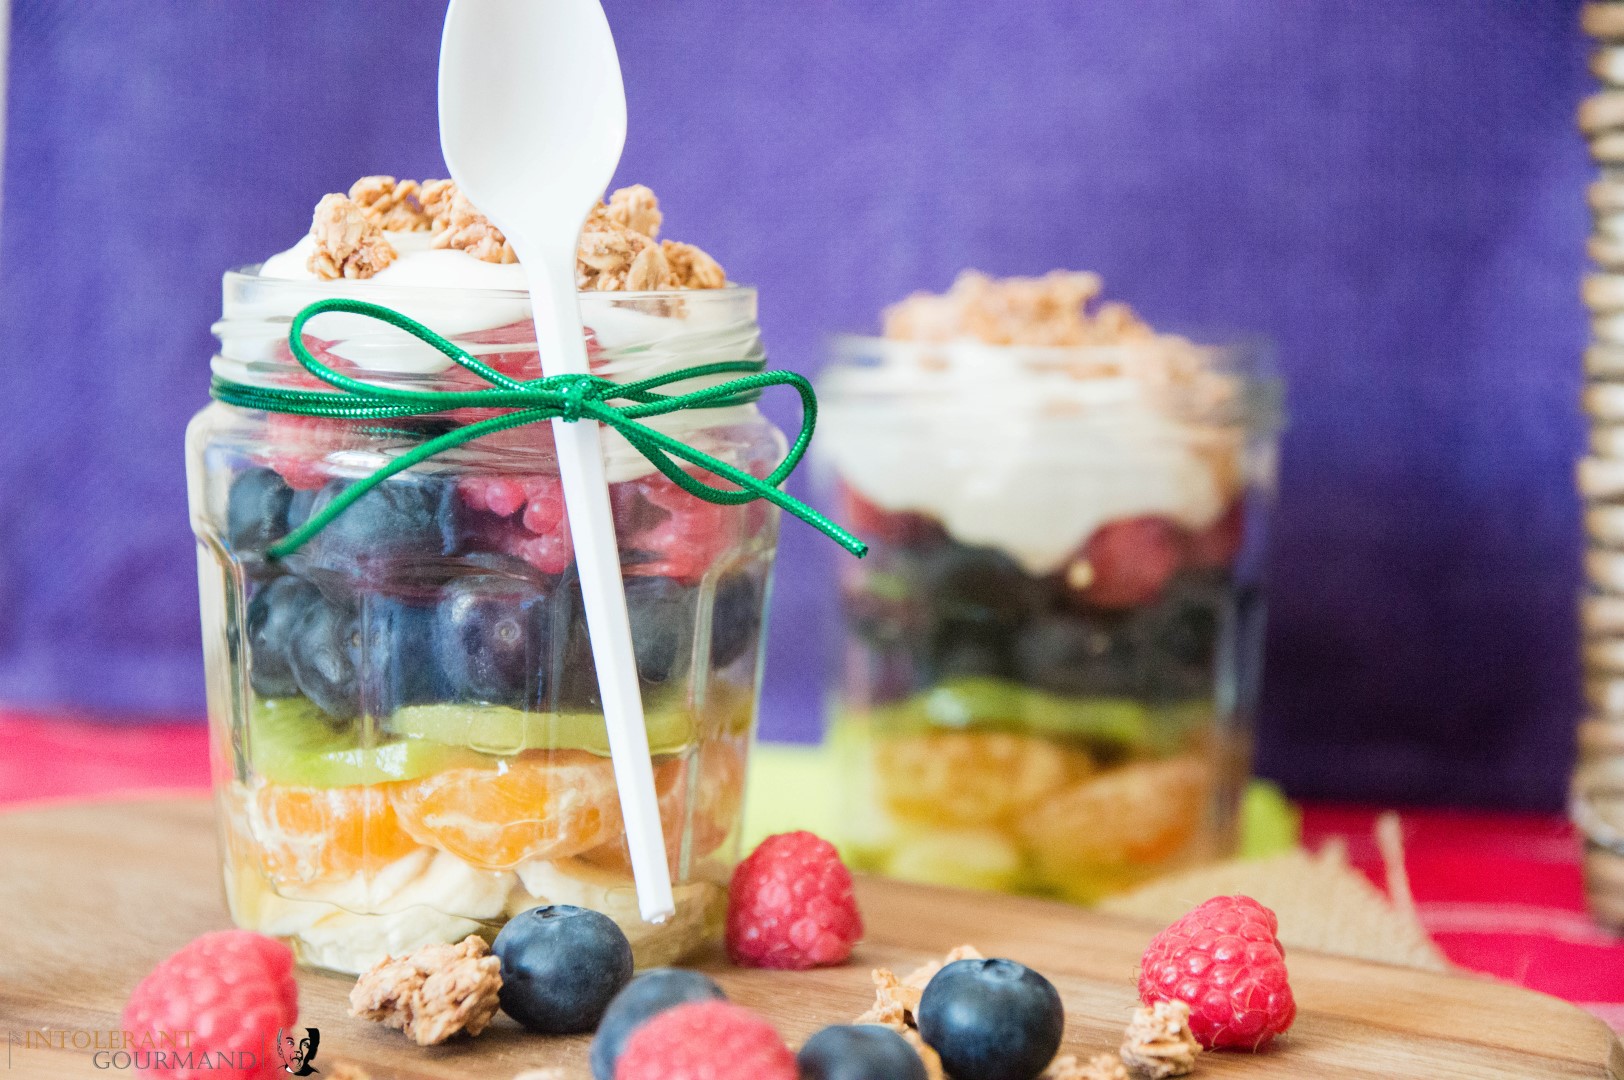 Rainbow Fruit Salad - naturally top14 allergen free, and bursting with flavour! We've teamed these delicious fruits with a dairy-free creme fraiche topping, along with gluten-free granola. Perfect for a #freefrompicnic www.intolerantgourmand.com